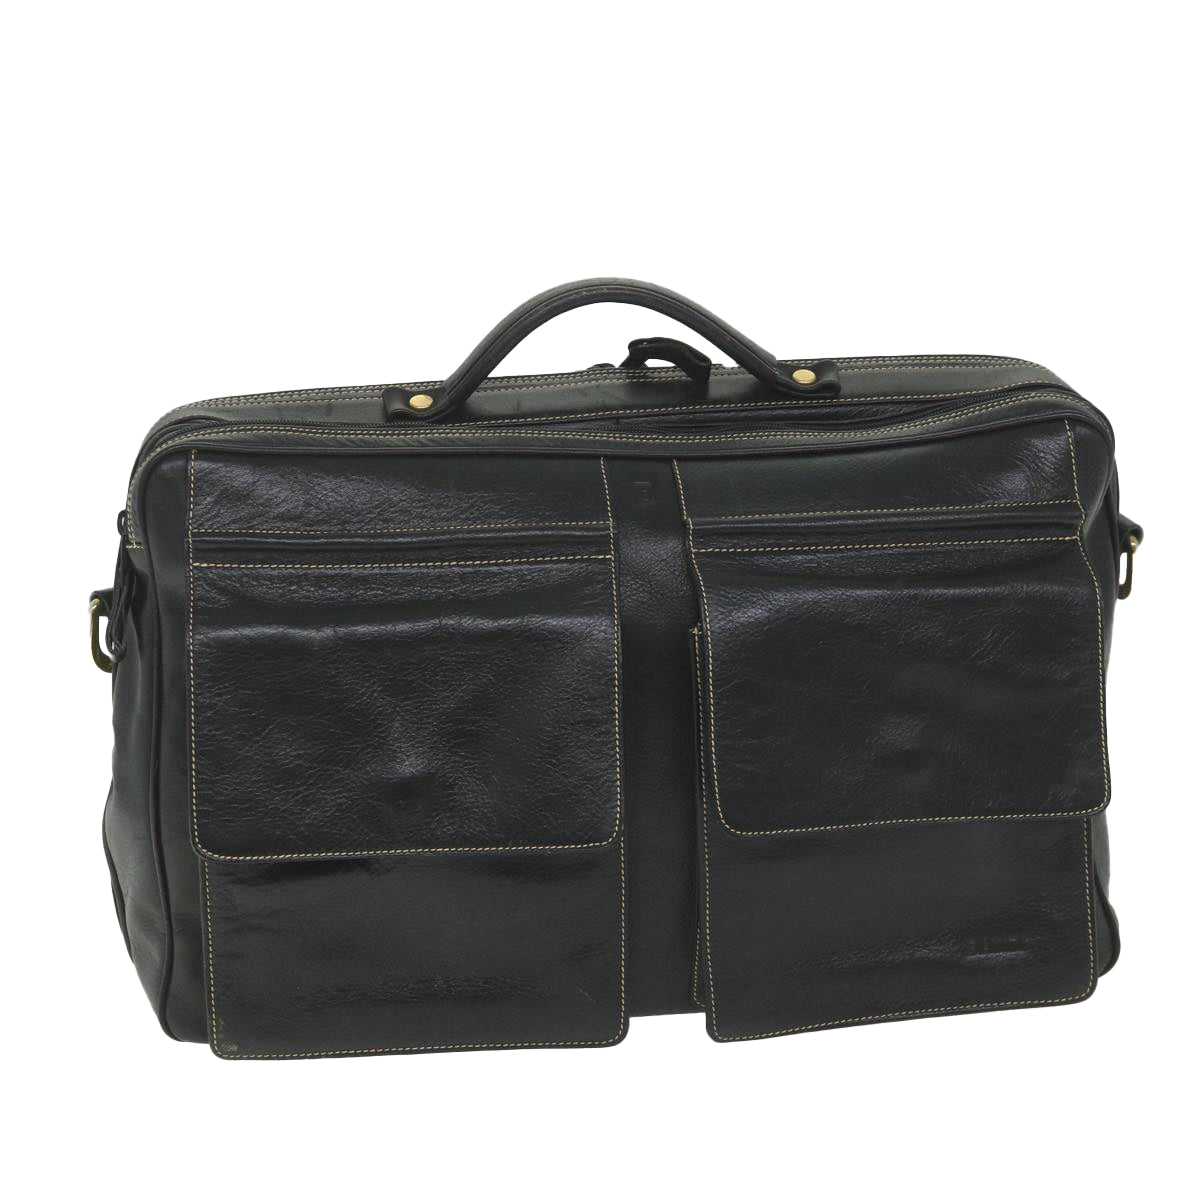 BALLY Business Bag Leather Black Auth bs9840